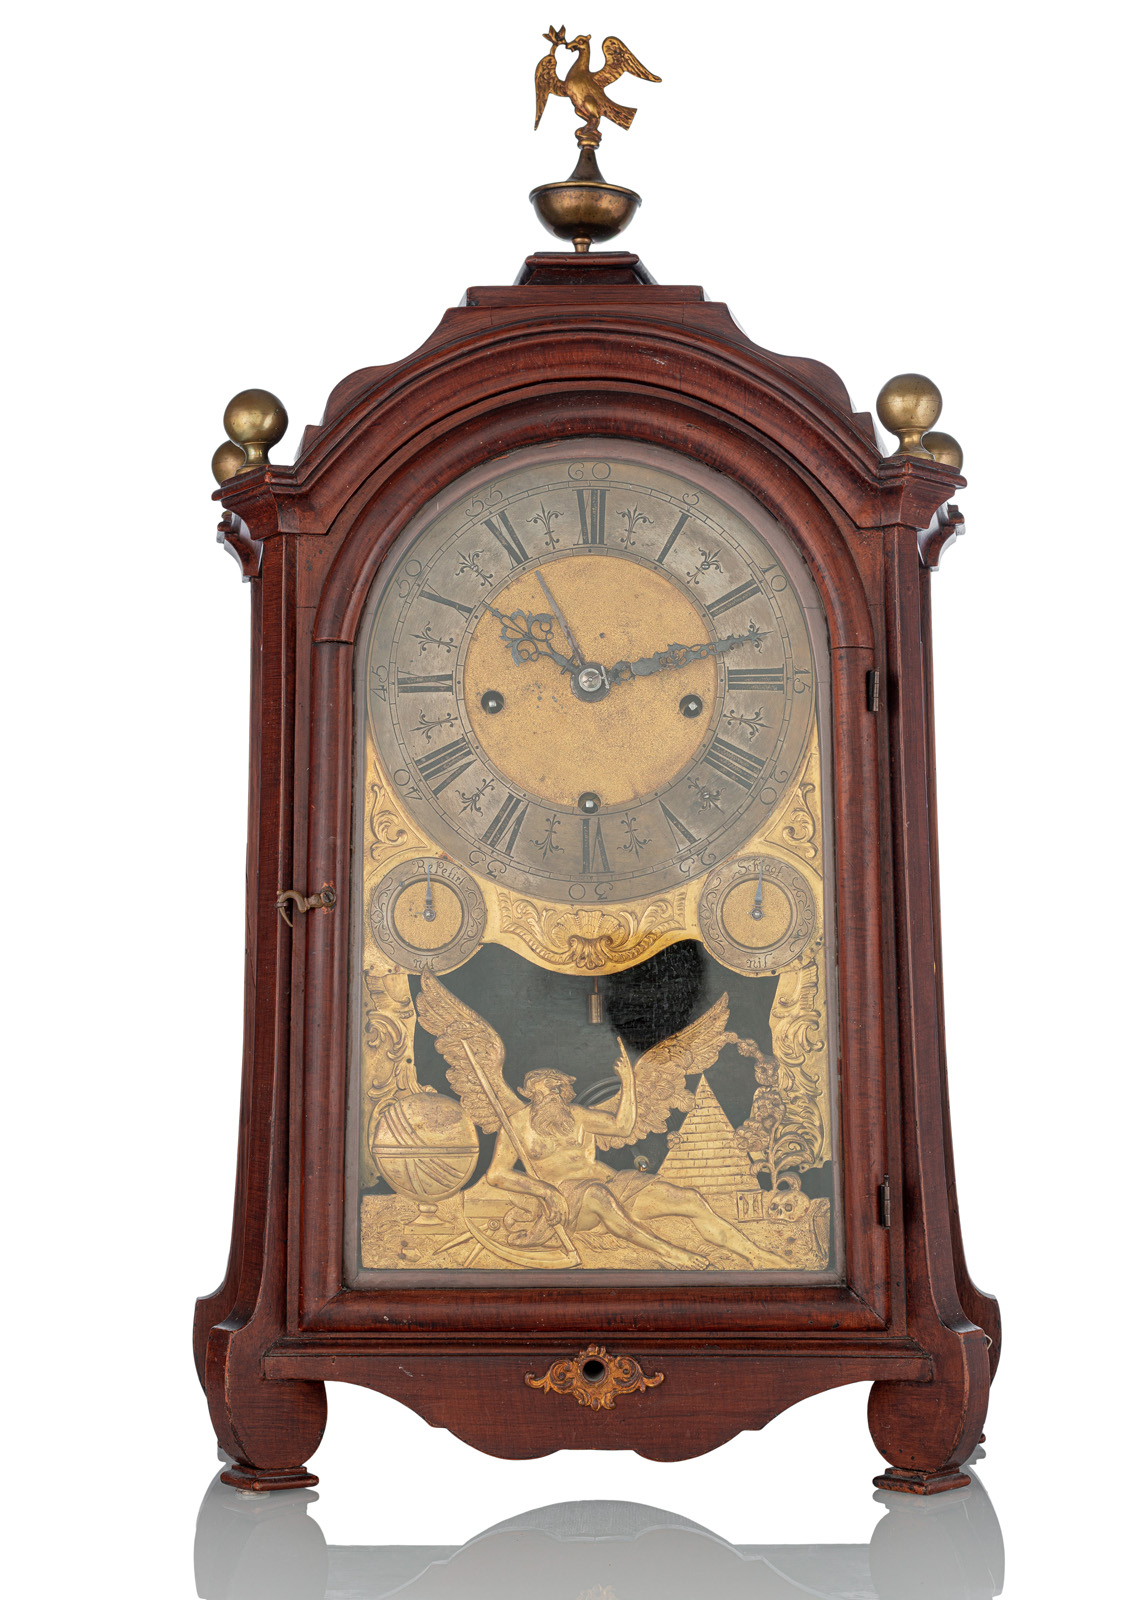 A SOUTH GERMAN BRASS MOUNTED GRAINED WOOD AND DISPLAY "STUTZUHR" CLOCK